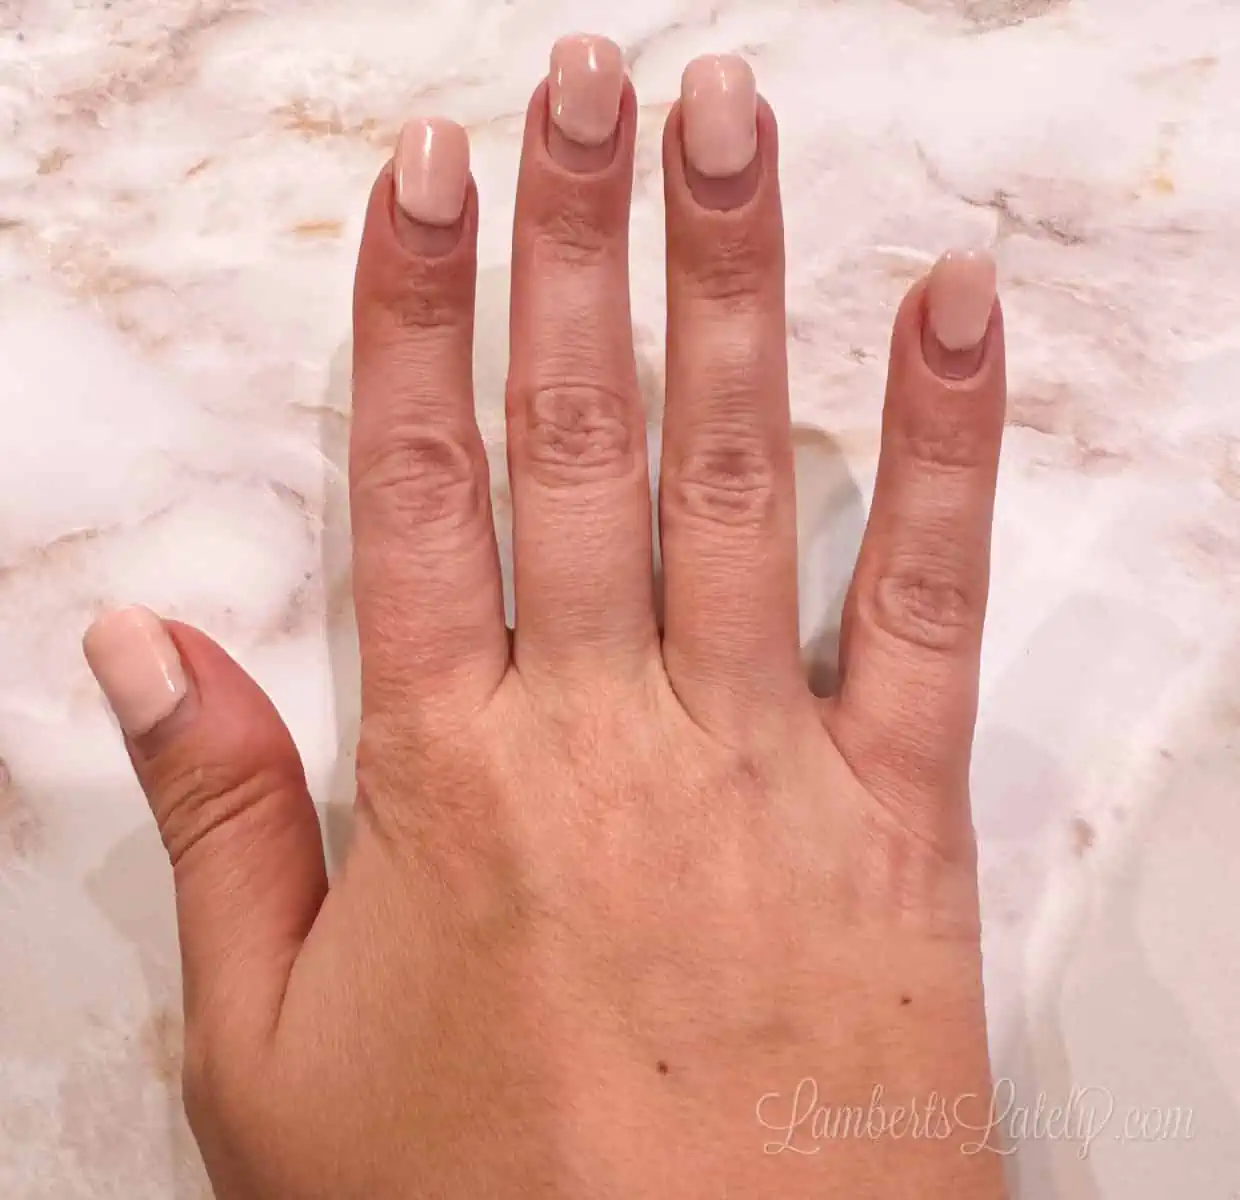 nails with 4 weeks of growth.